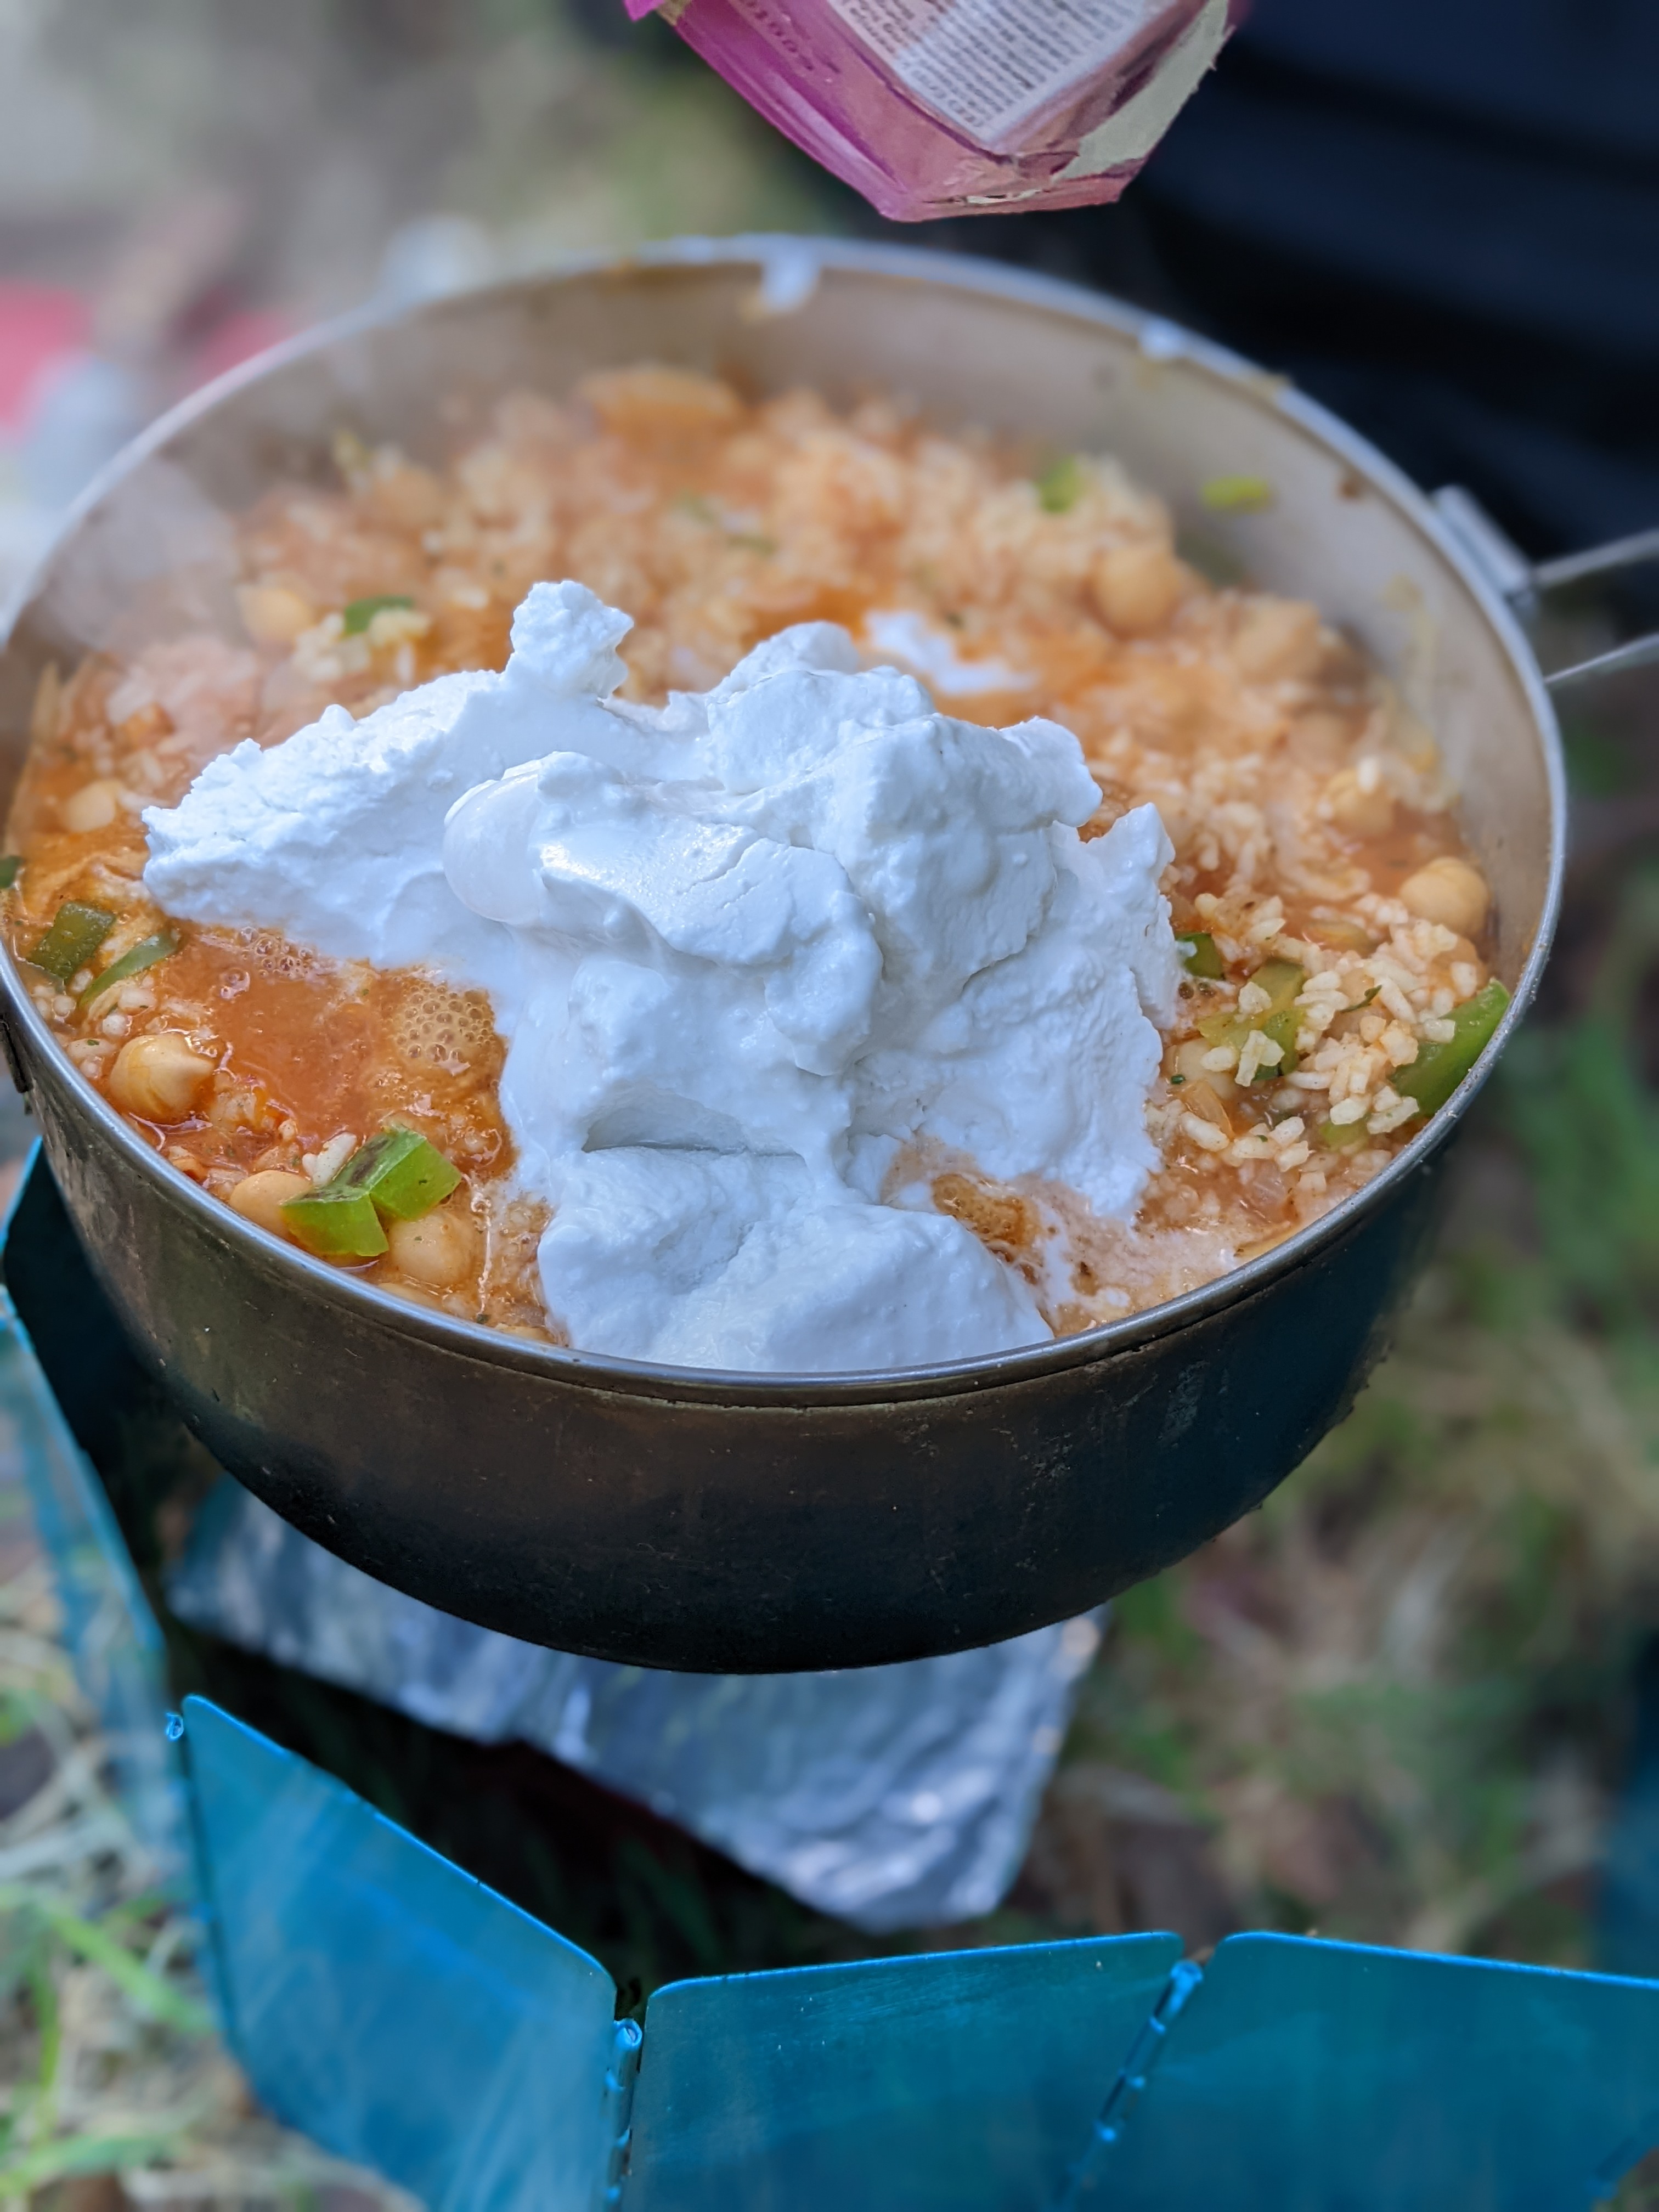 a huge blob of coconut cream on top of a steaming pot of food